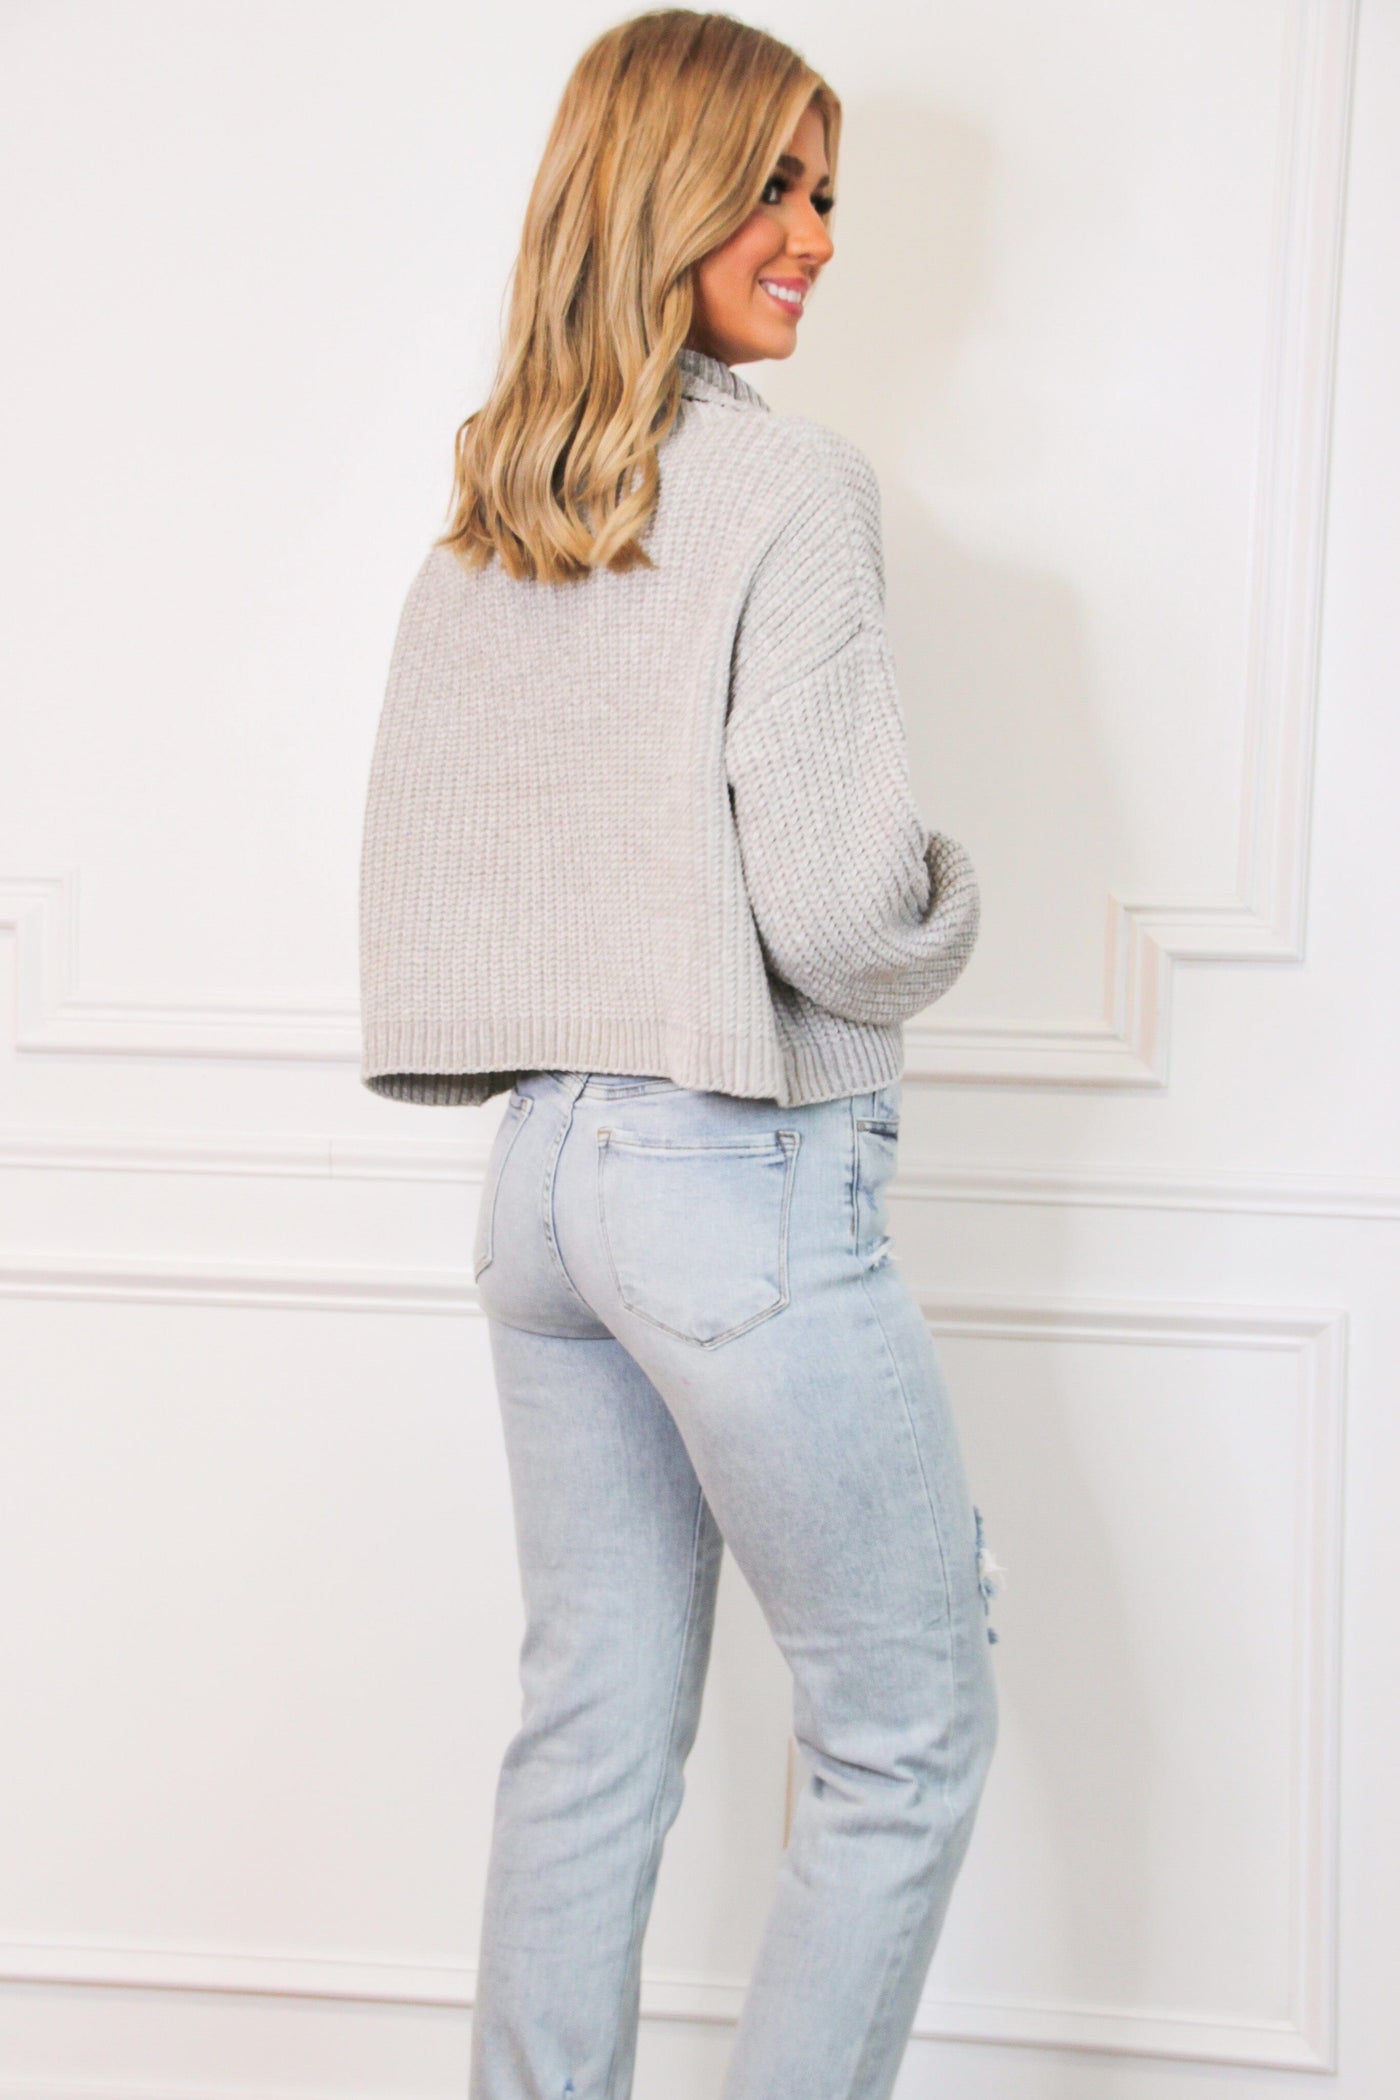 Winter Wishes Chenille Cropped Sweater: Heather Gray - Bella and Bloom Boutique